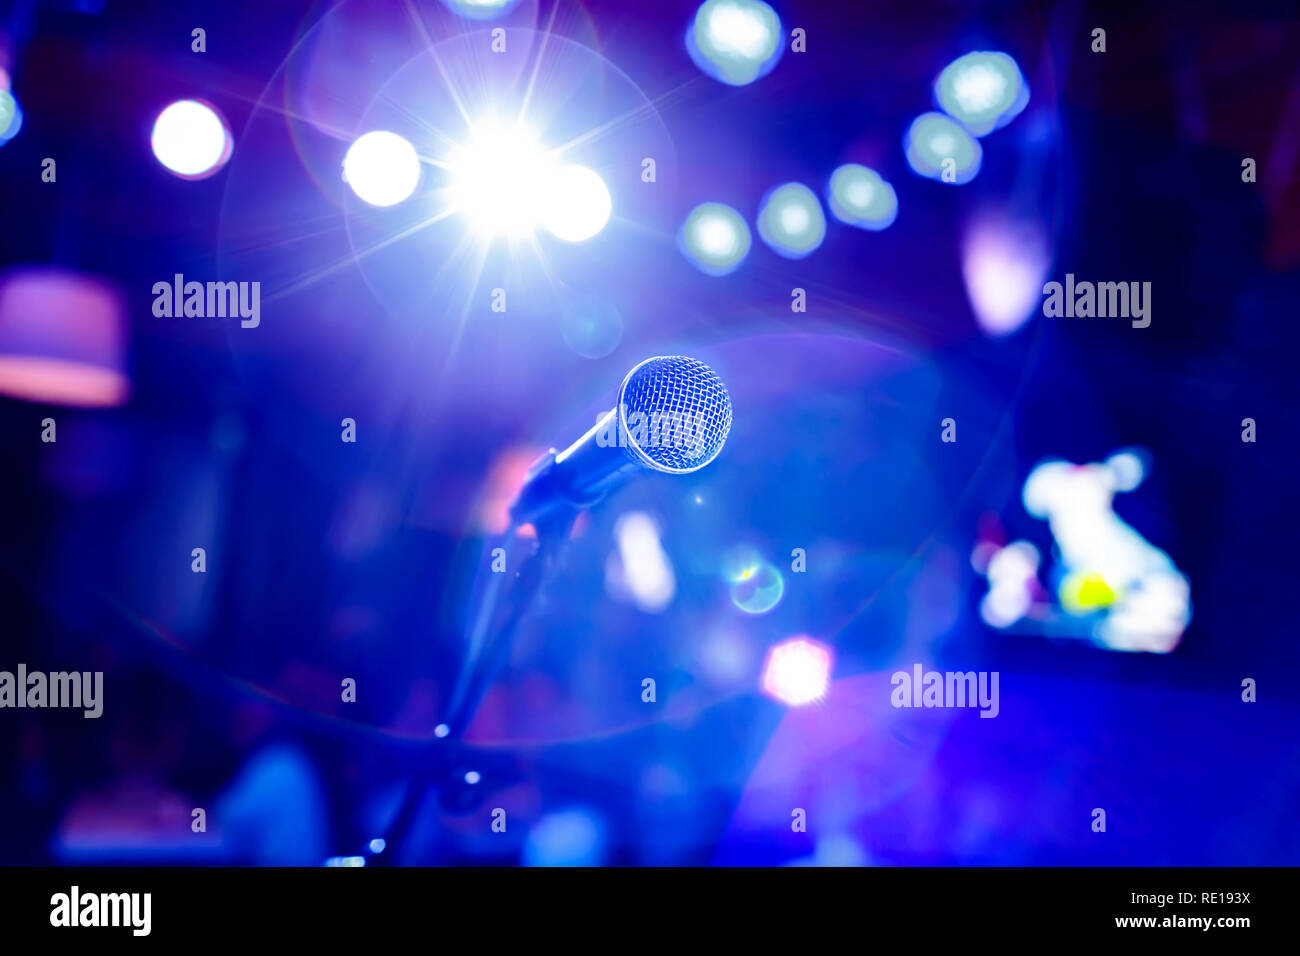 Public performance on stage Microphone on stage against a background of auditorium. Shallow depth of field. Public performance on stage. Stock Photo